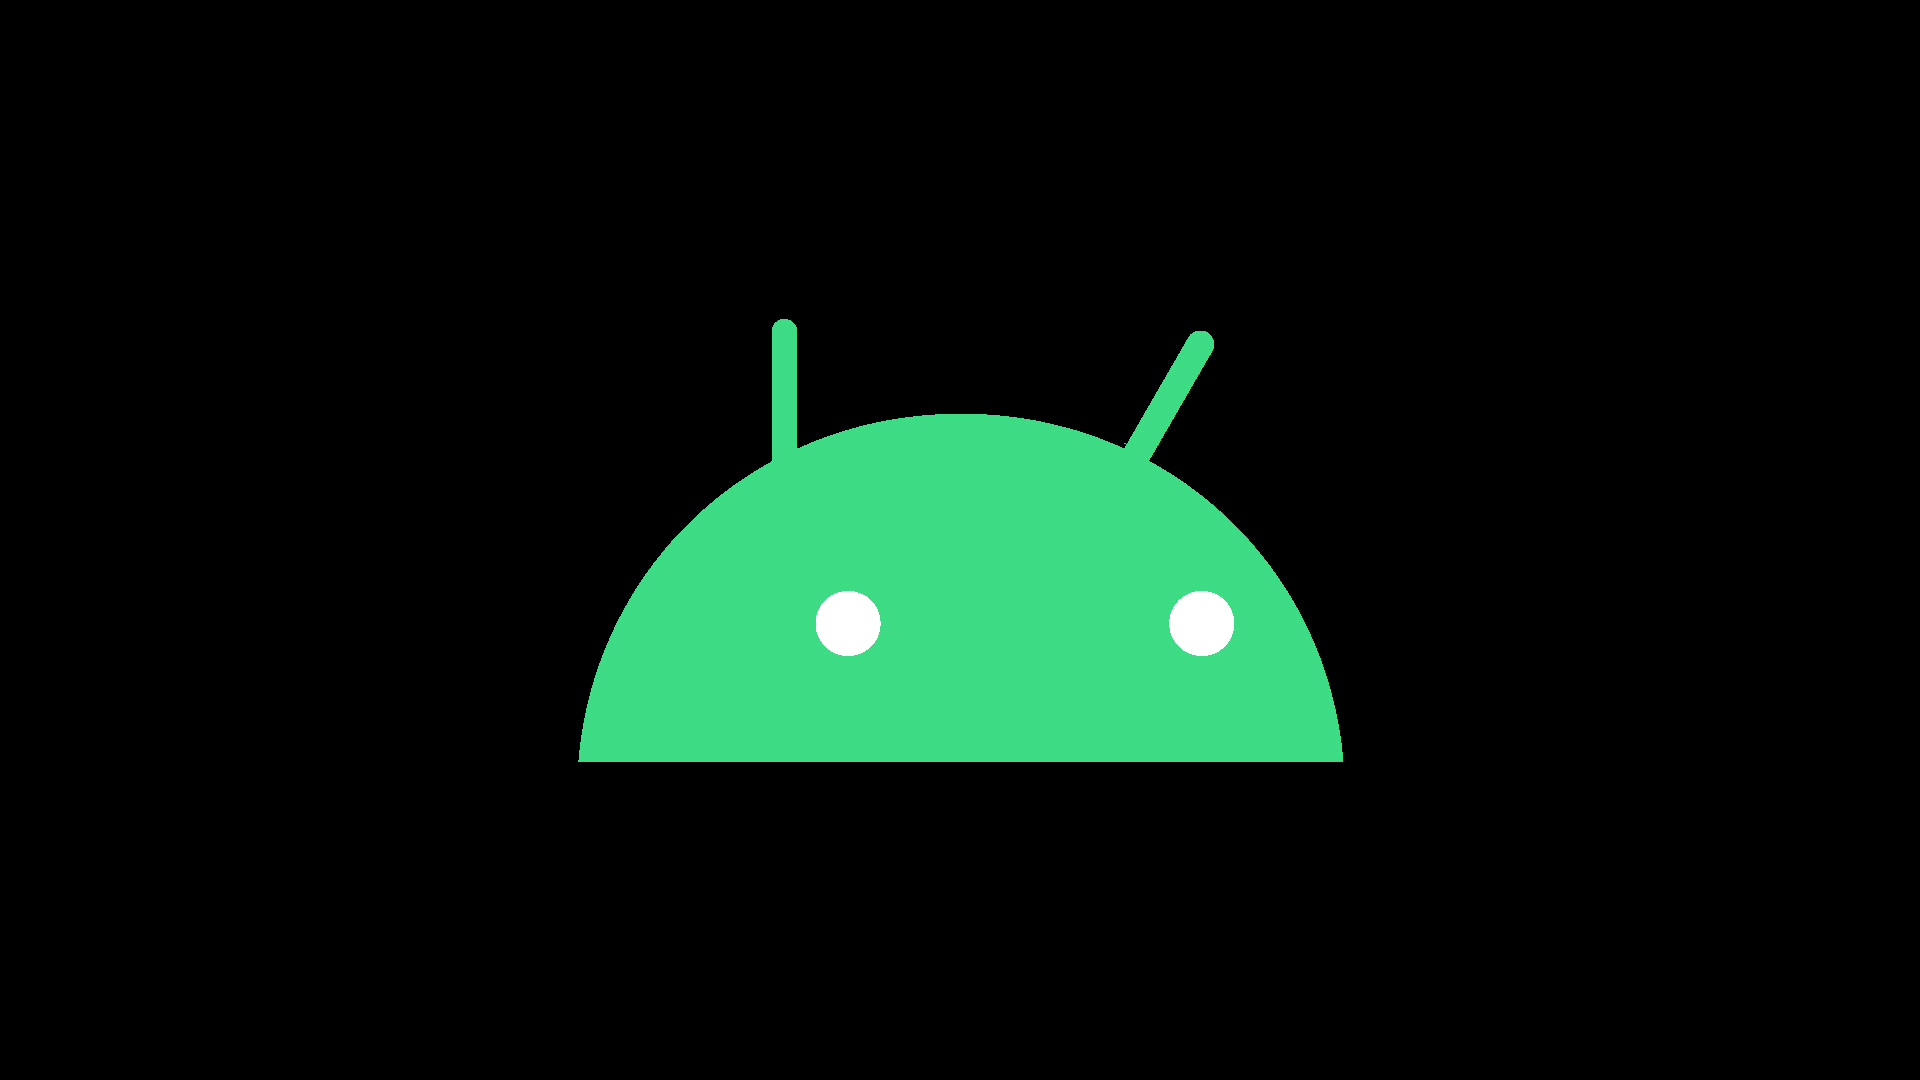 new android logo 2019 robot head black background